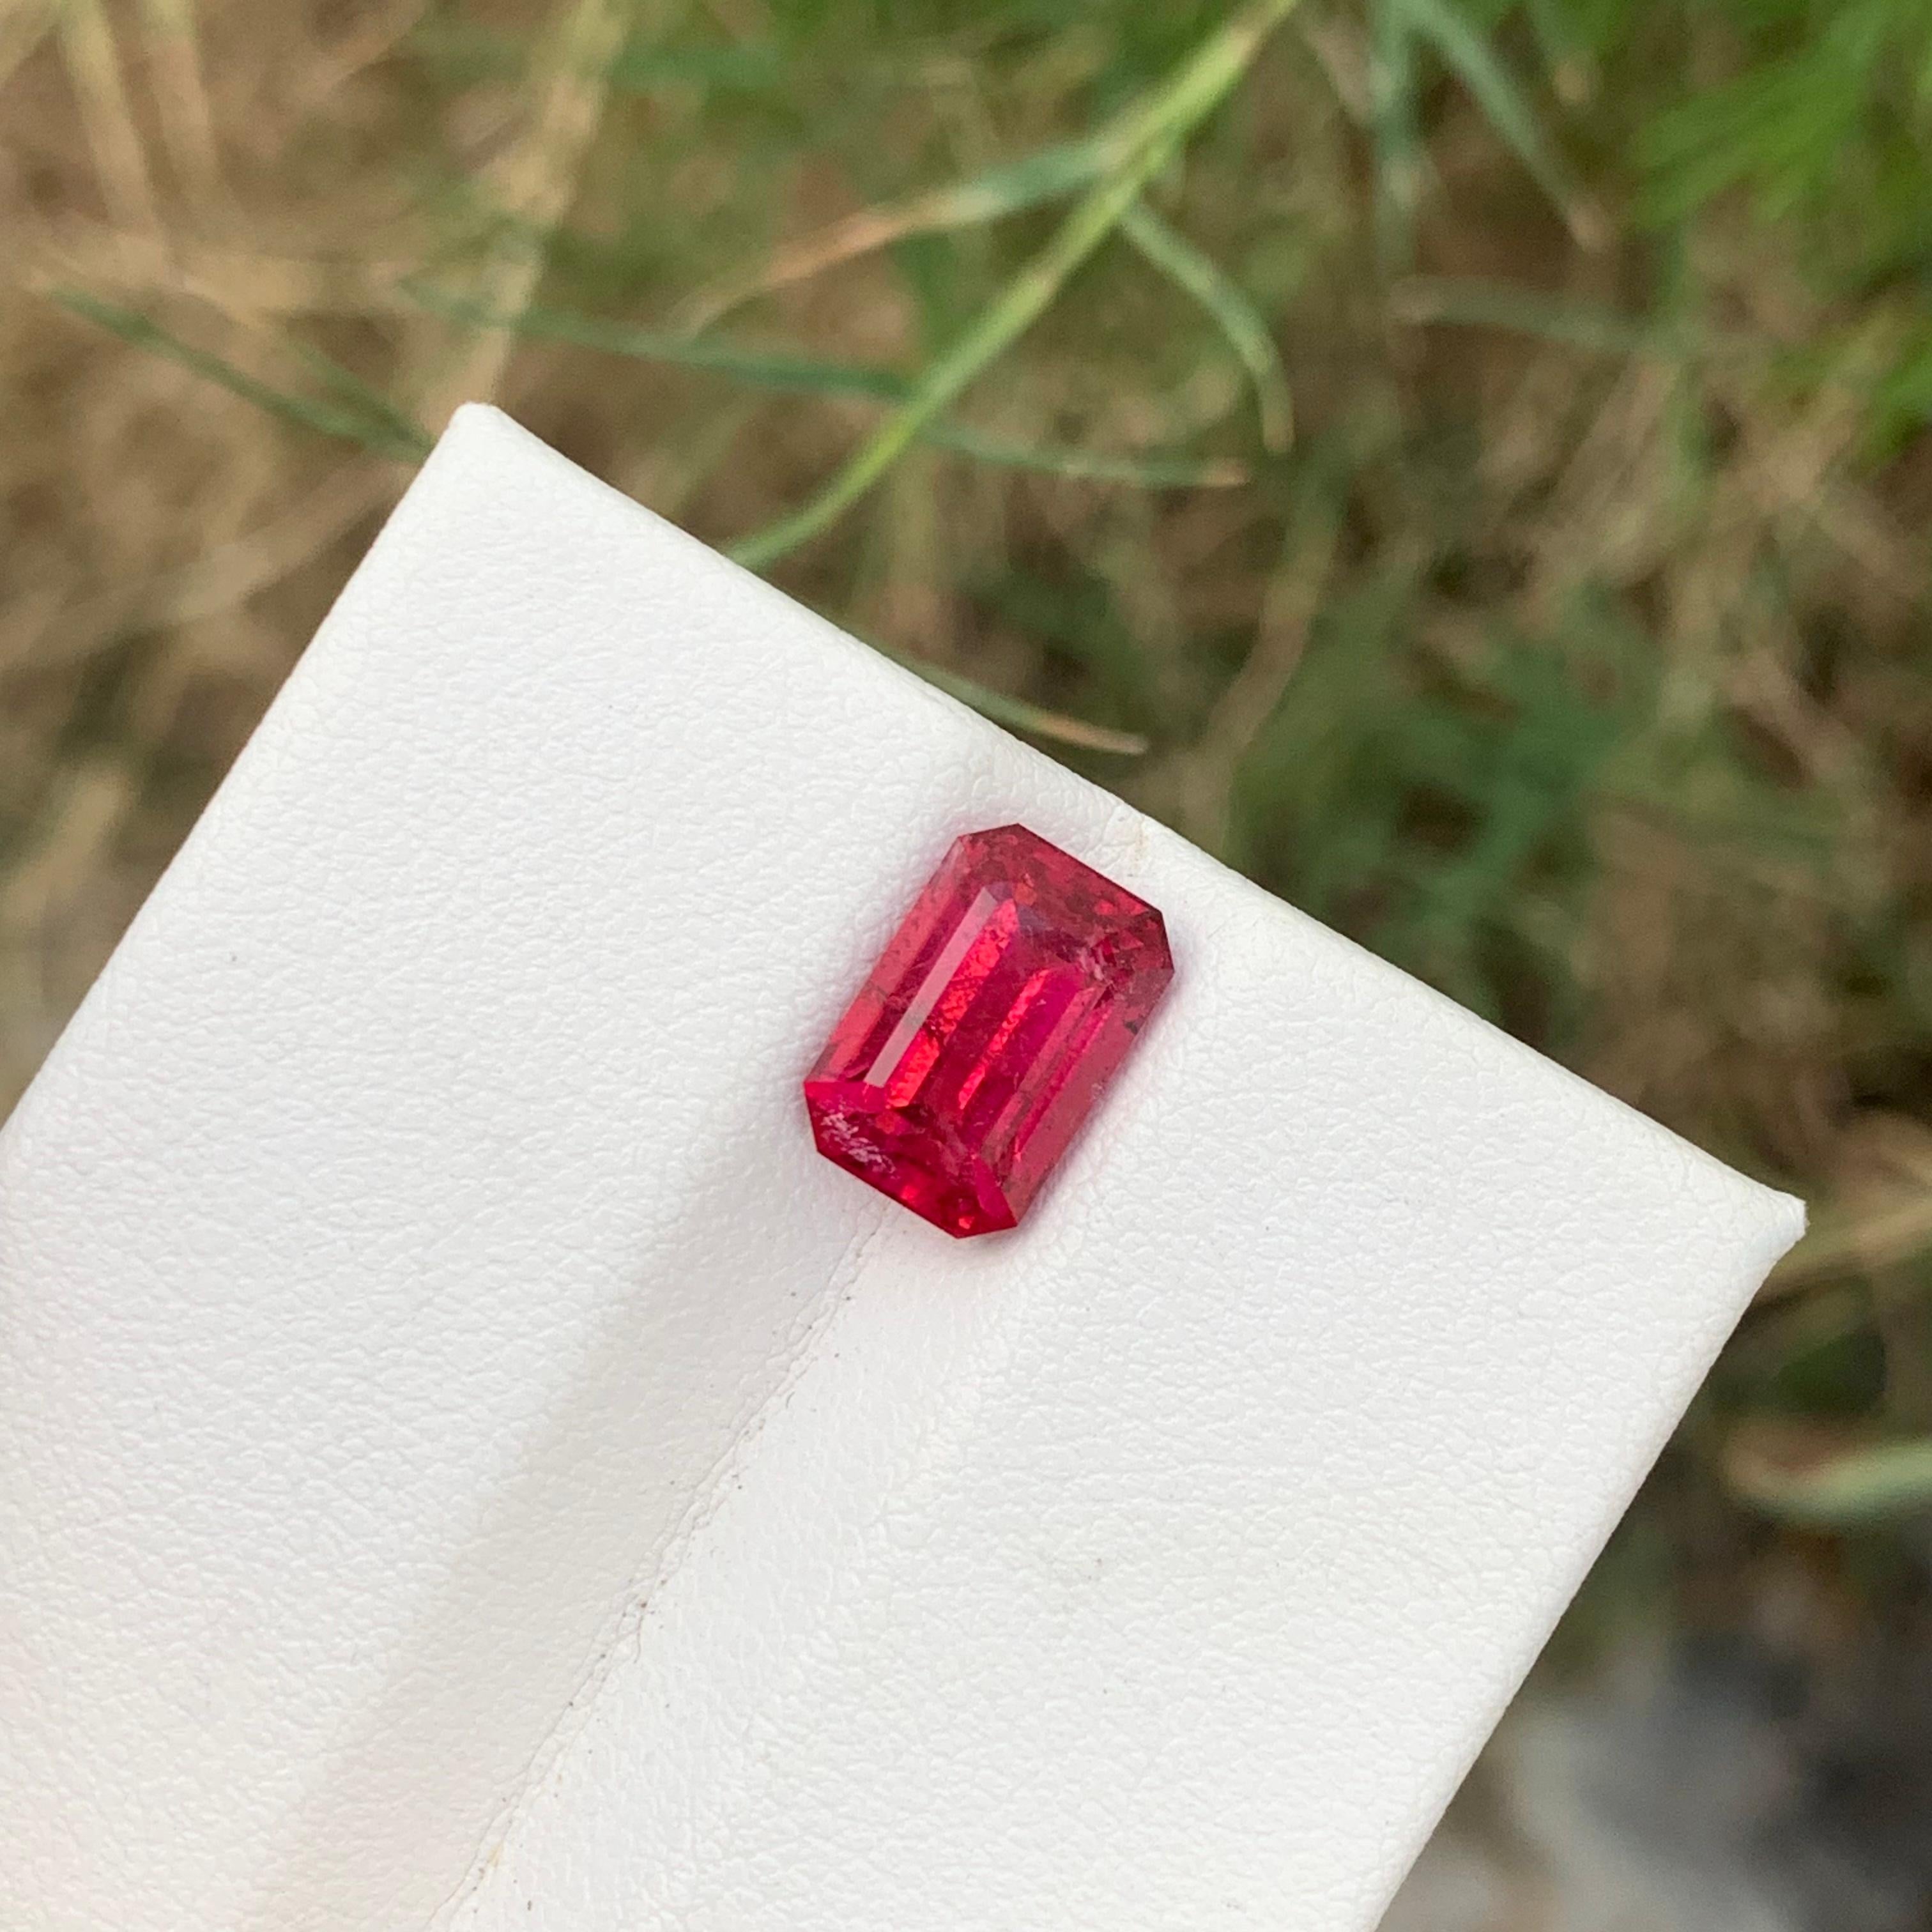 3.20 Carats Faceted Natural Rubellite Tourmaline Gemstone Emerald Shape For Sale 9